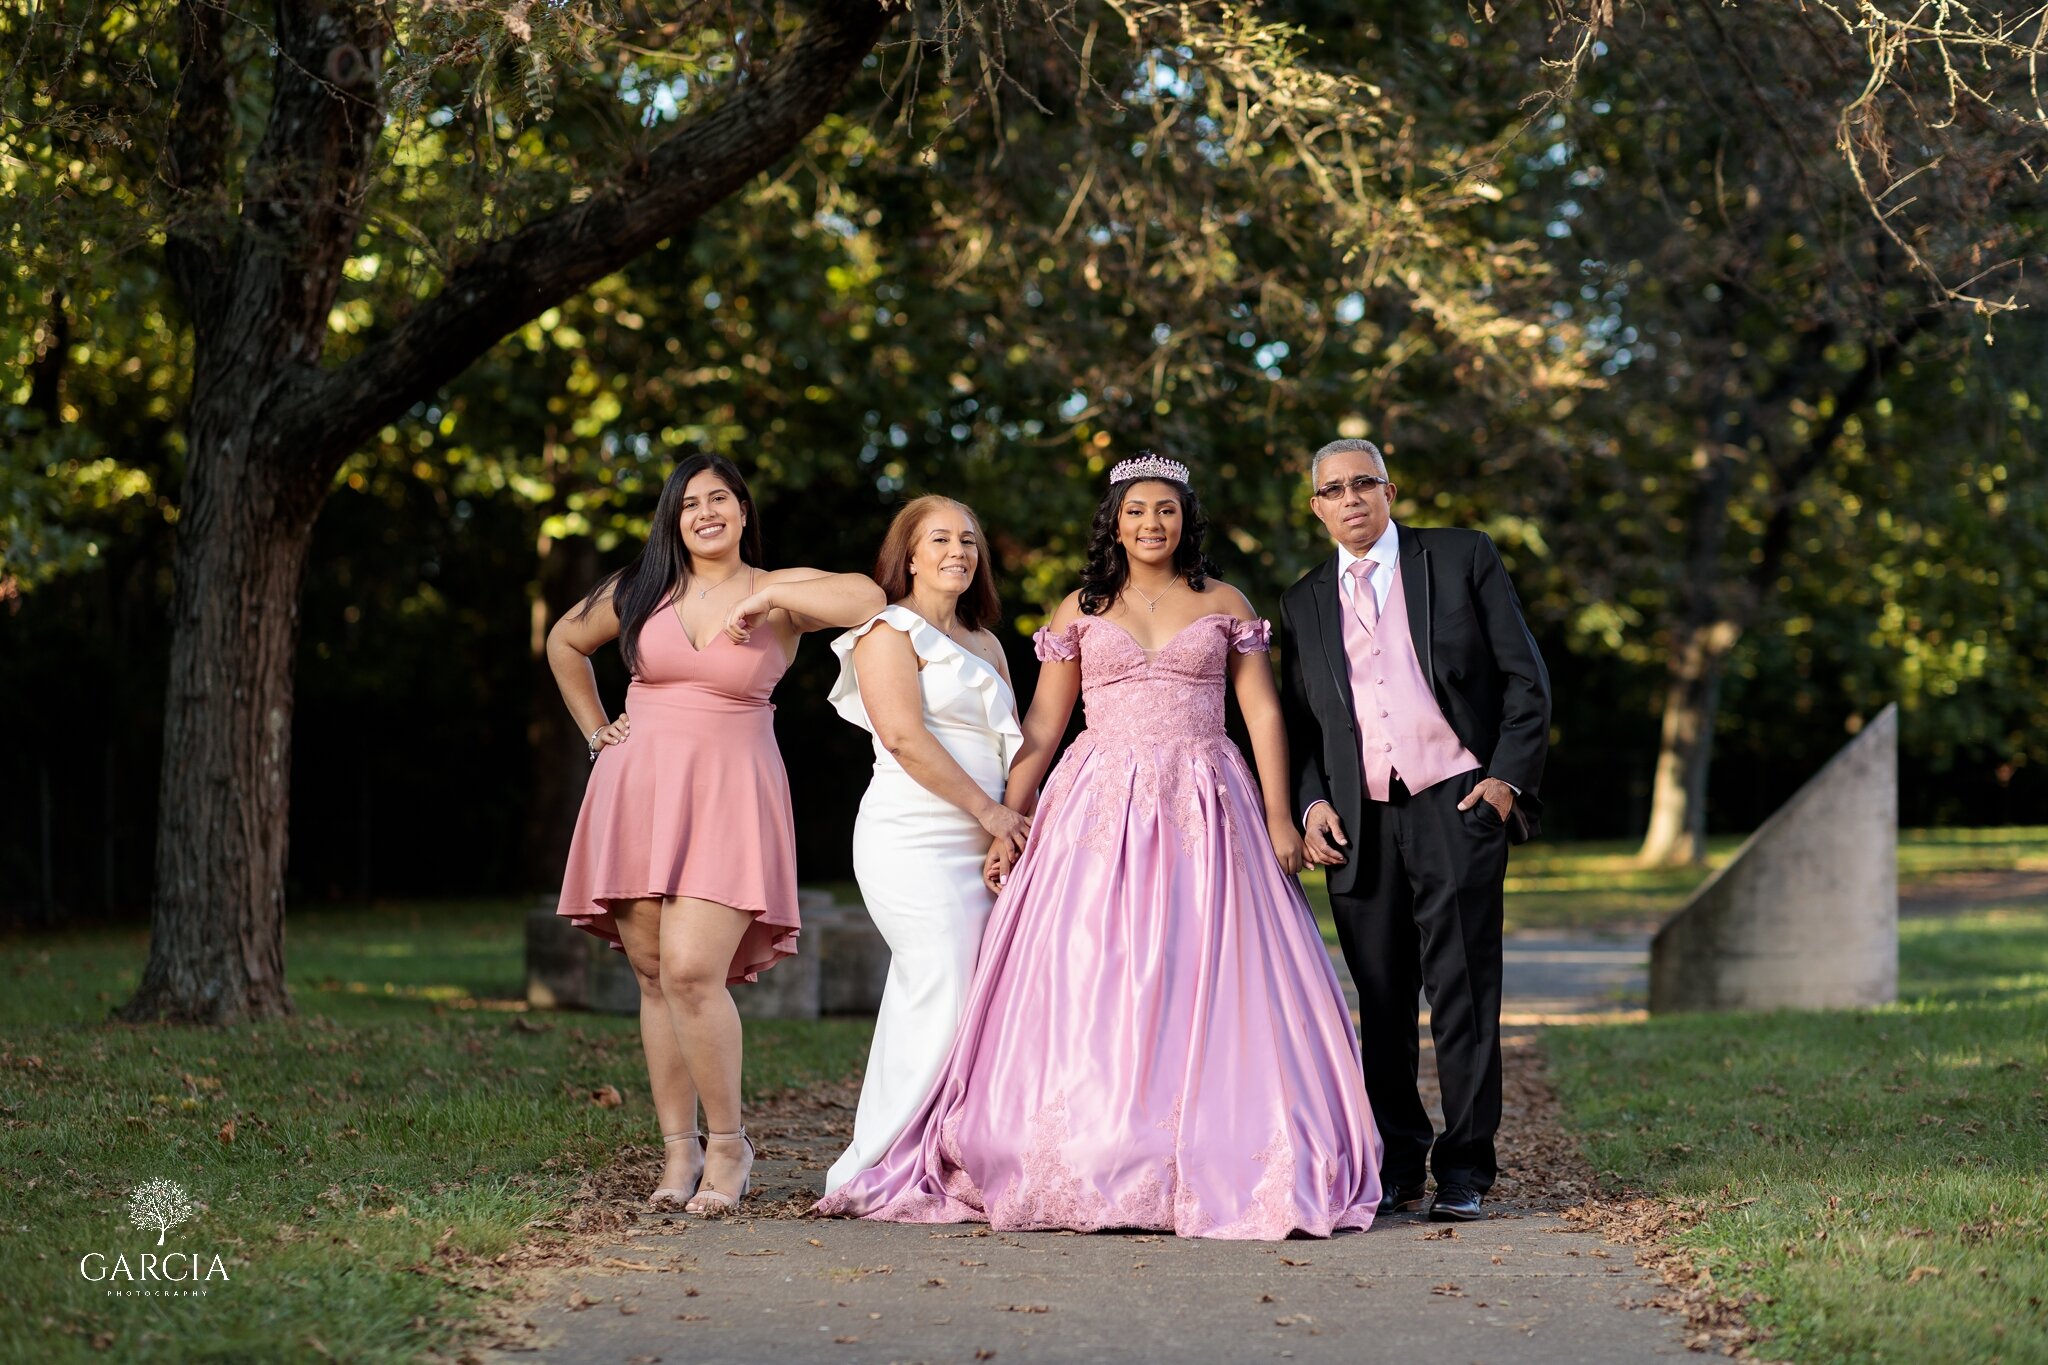 Windy-Taveras-Quince-Session-Garcia-Photography-7105.jpg